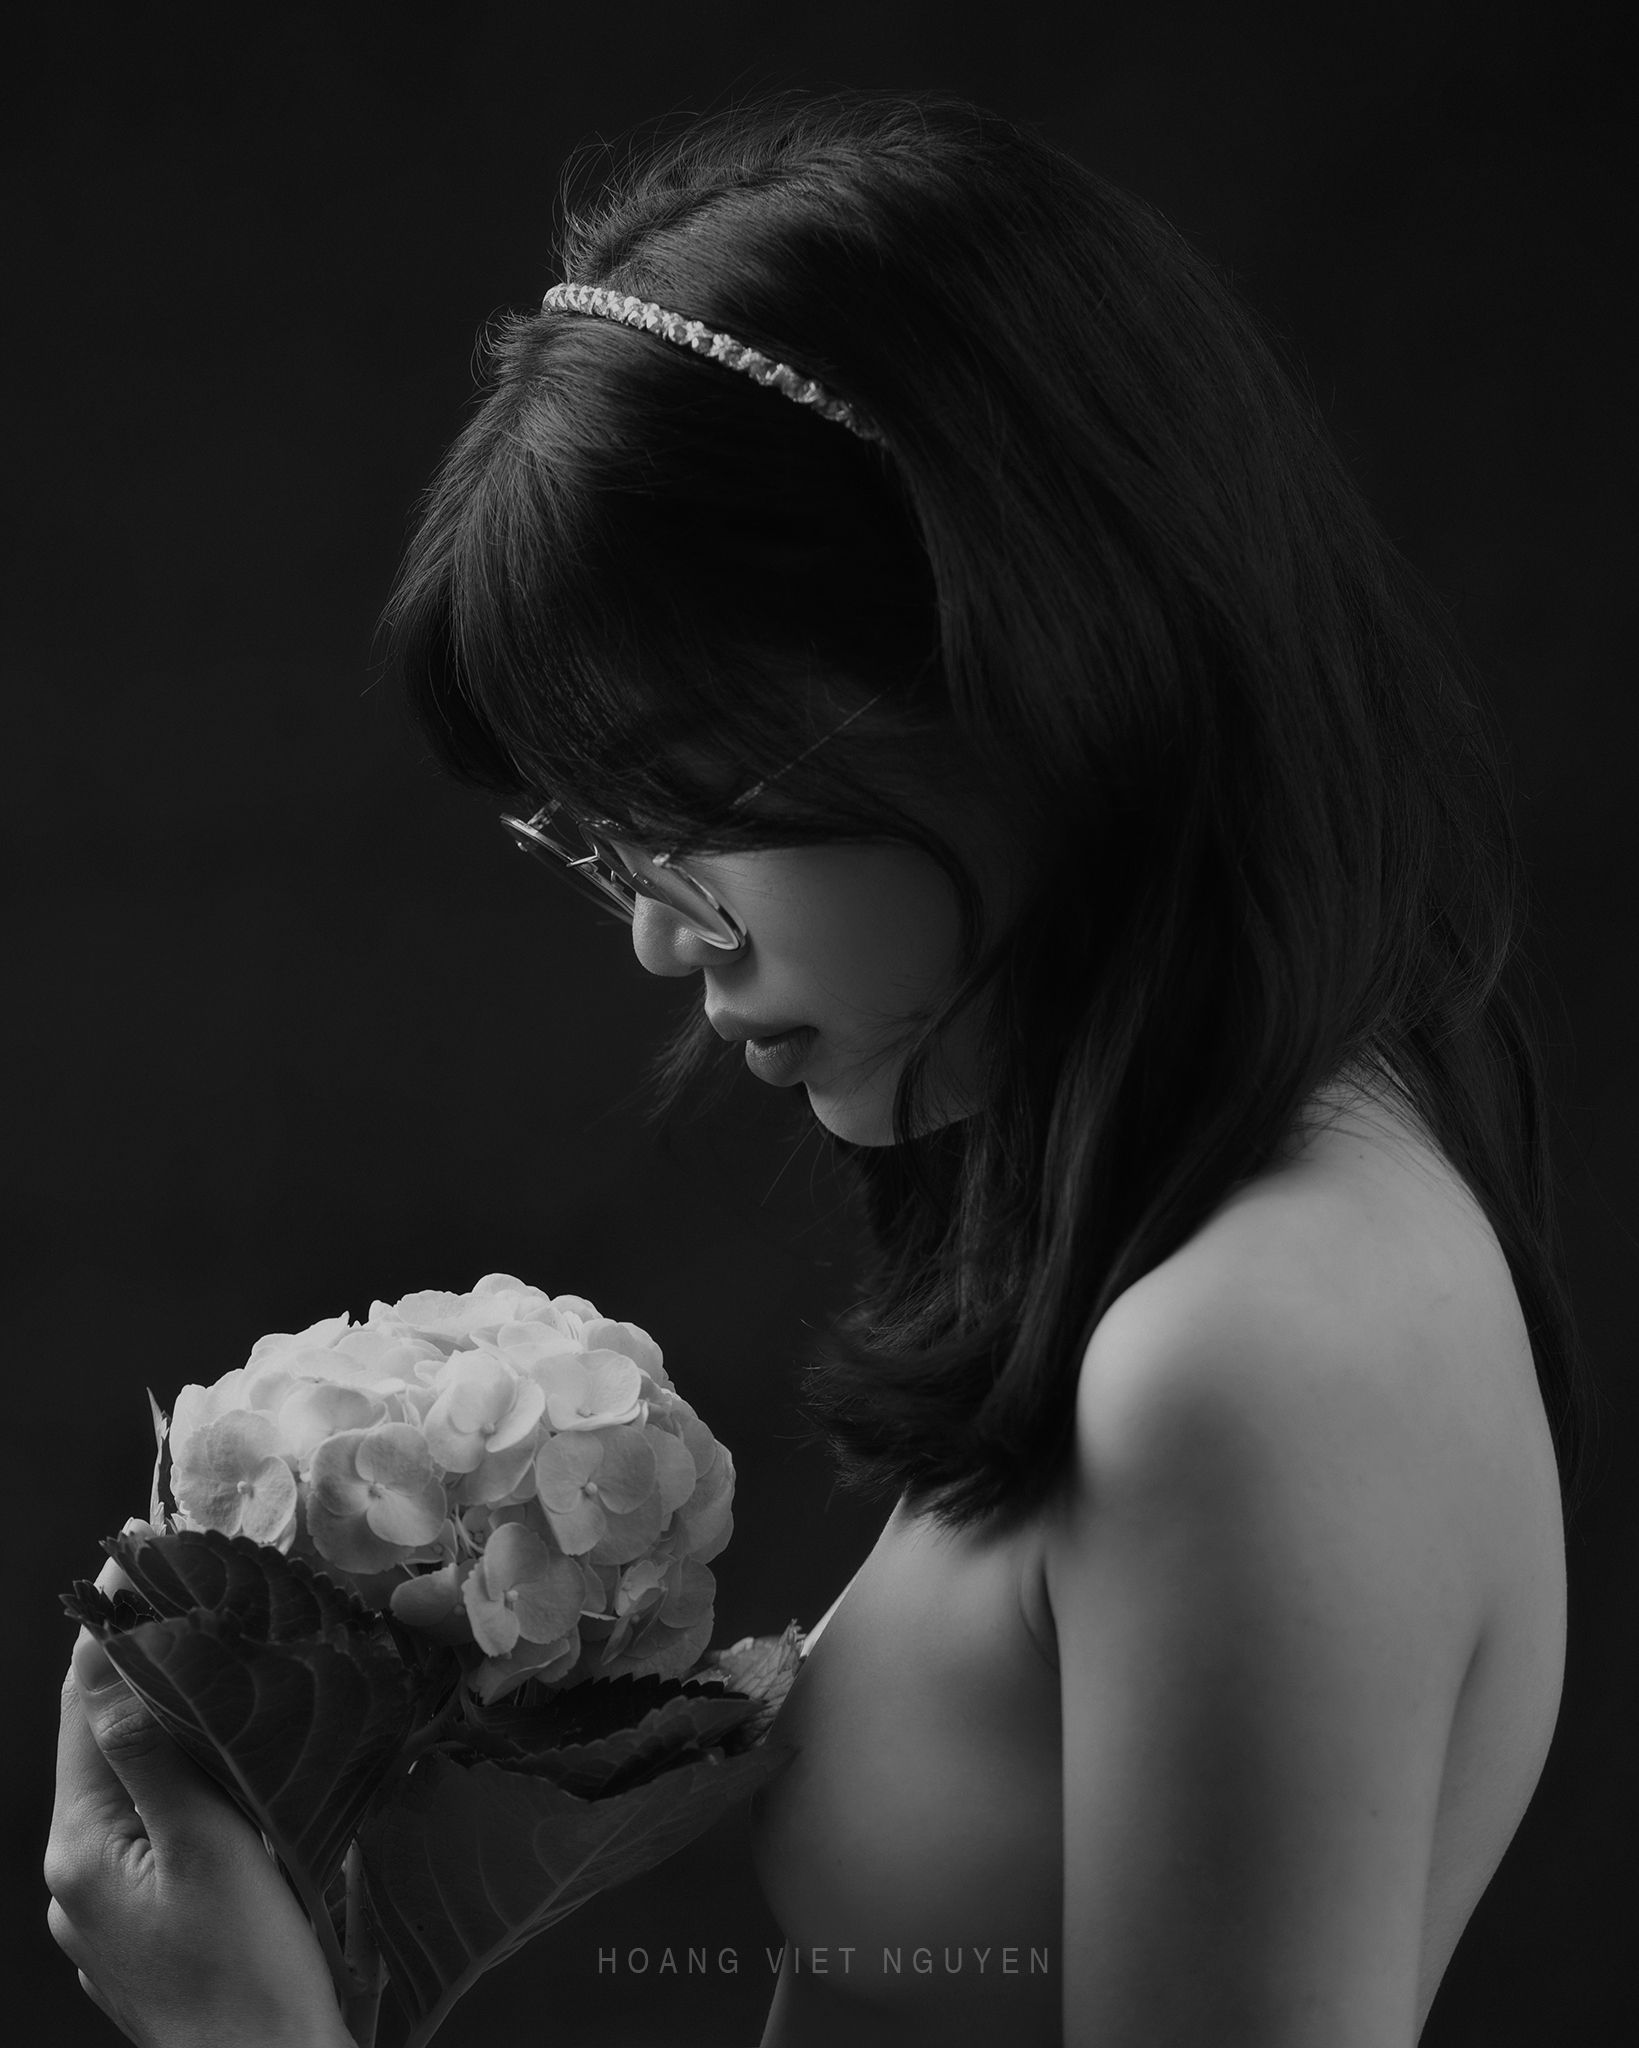 fine nude, nude, glamour, asian, vietnam, vietnamese, body, black and white, bw, bnw, monochrome, mood, flower, Nguyen Hoang Viet